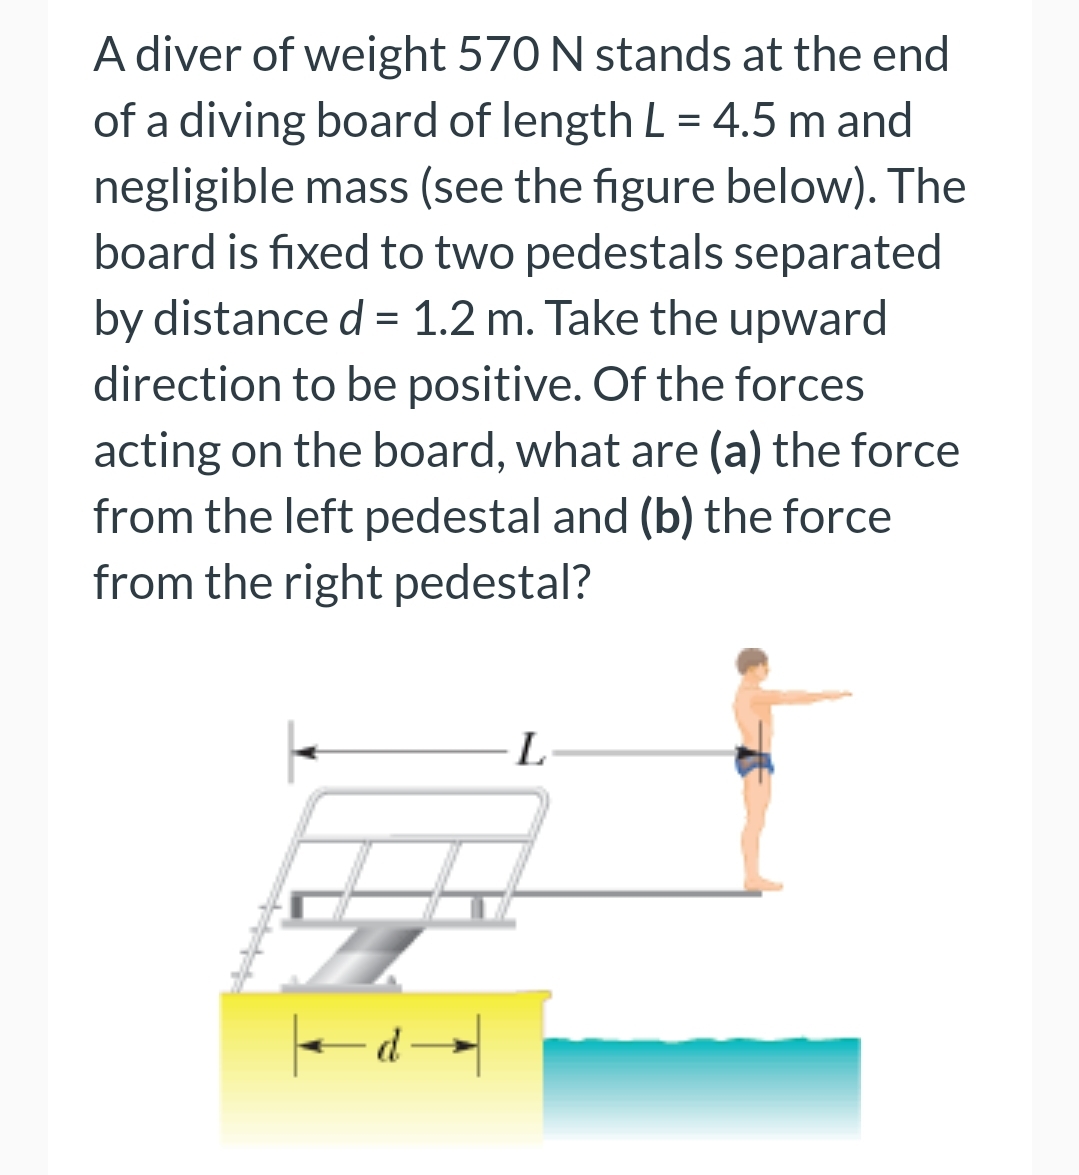 A diver of weight 570 N stands at the end
of a diving board of length L = 4.5 m and
negligible mass (see the figure below). The
board is fixed to two pedestals separated
by distance d = 1.2 m. Take the upward
direction to be positive. Of the forces
acting on the board, what are (a) the force
from the left pedestal and (b) the force
from the right pedestal?
←d◄
L